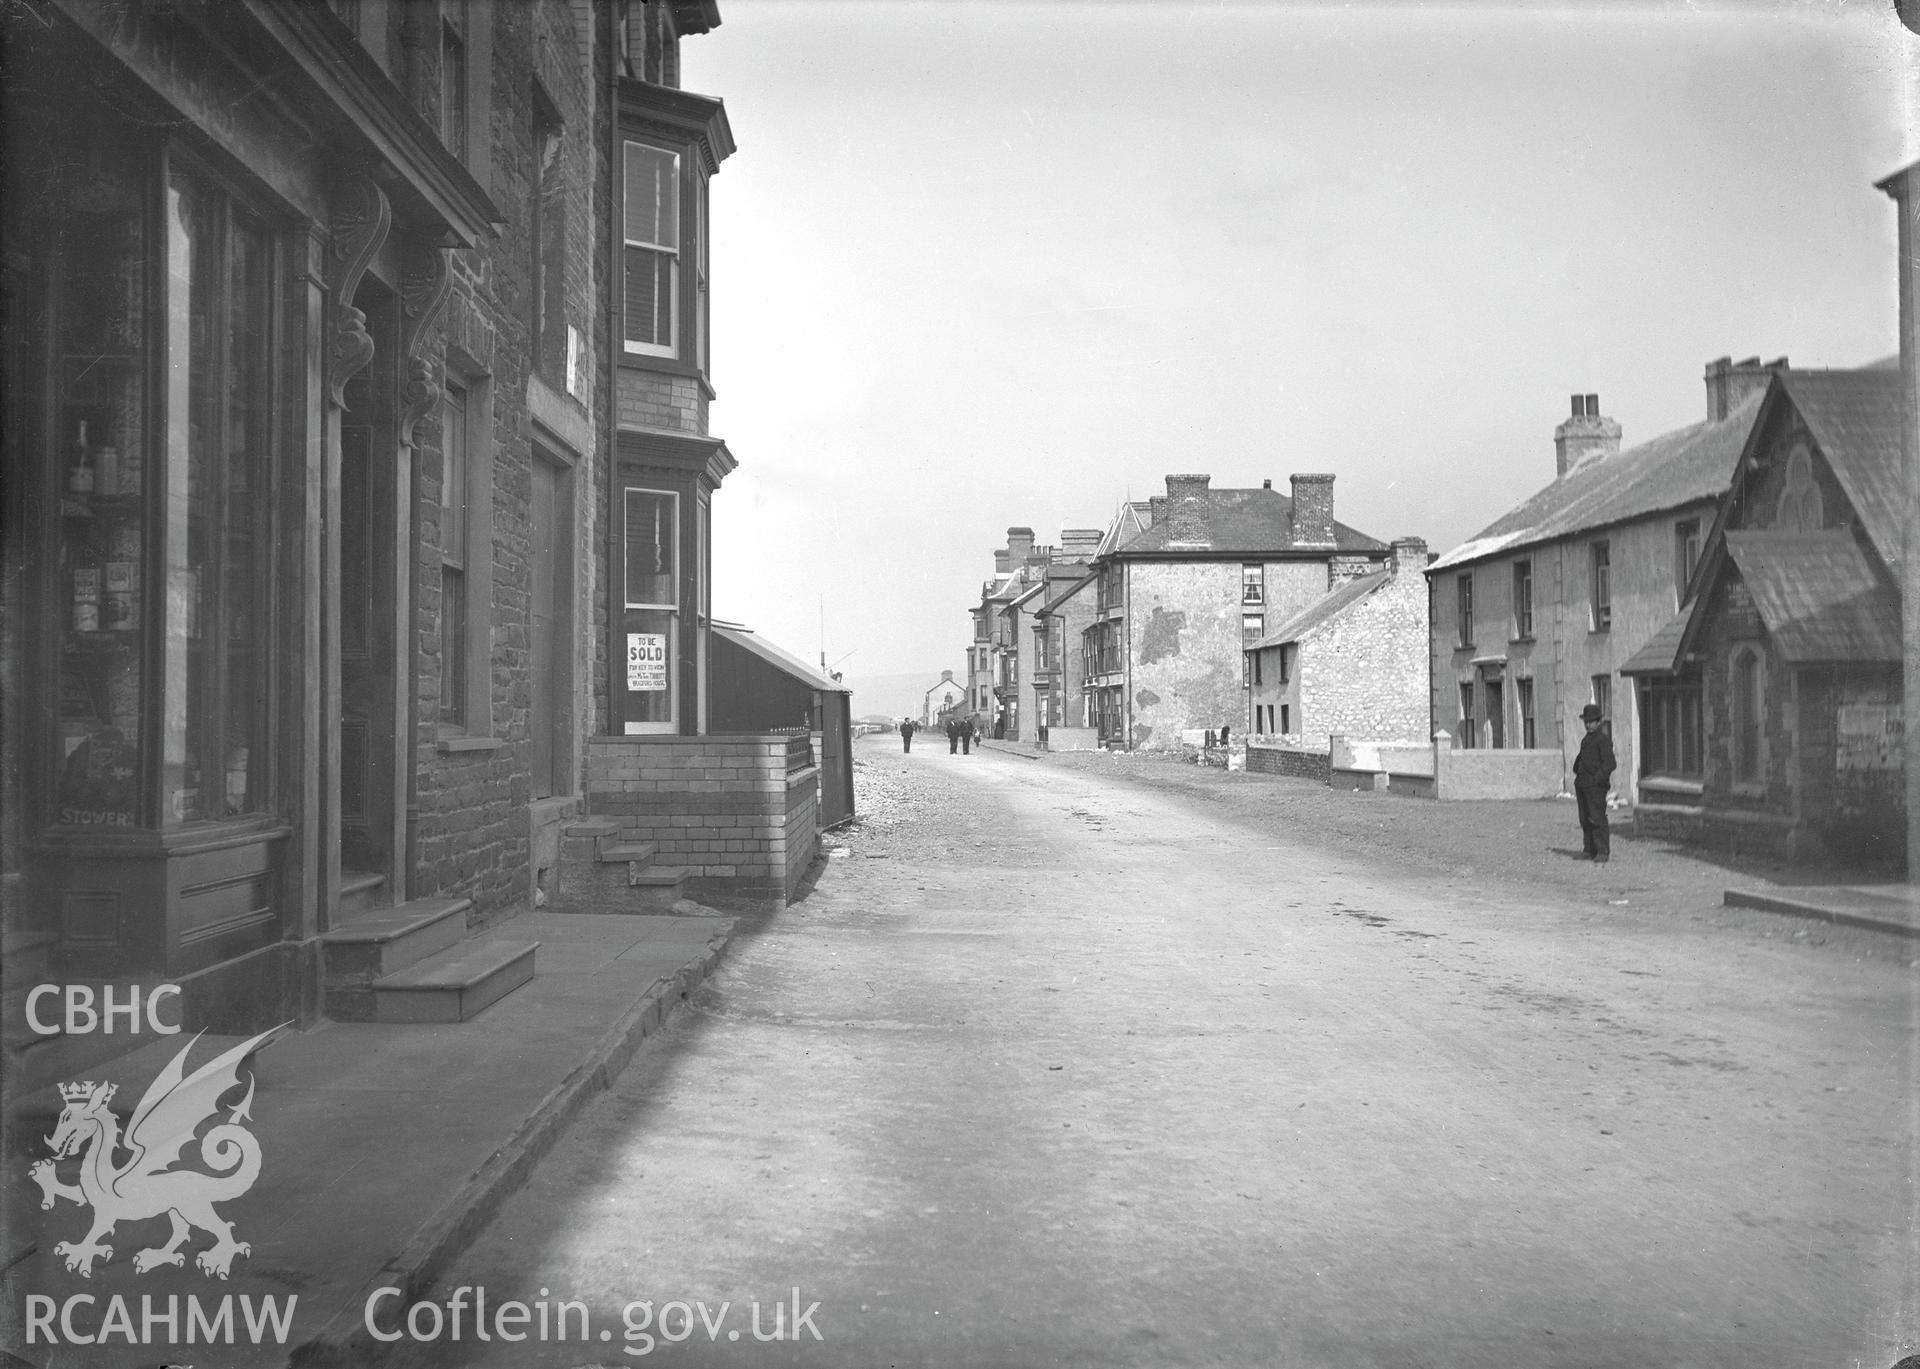 Black and white image dating from c.1910 showing Borth High Street,  taken by Emile T. Evans.